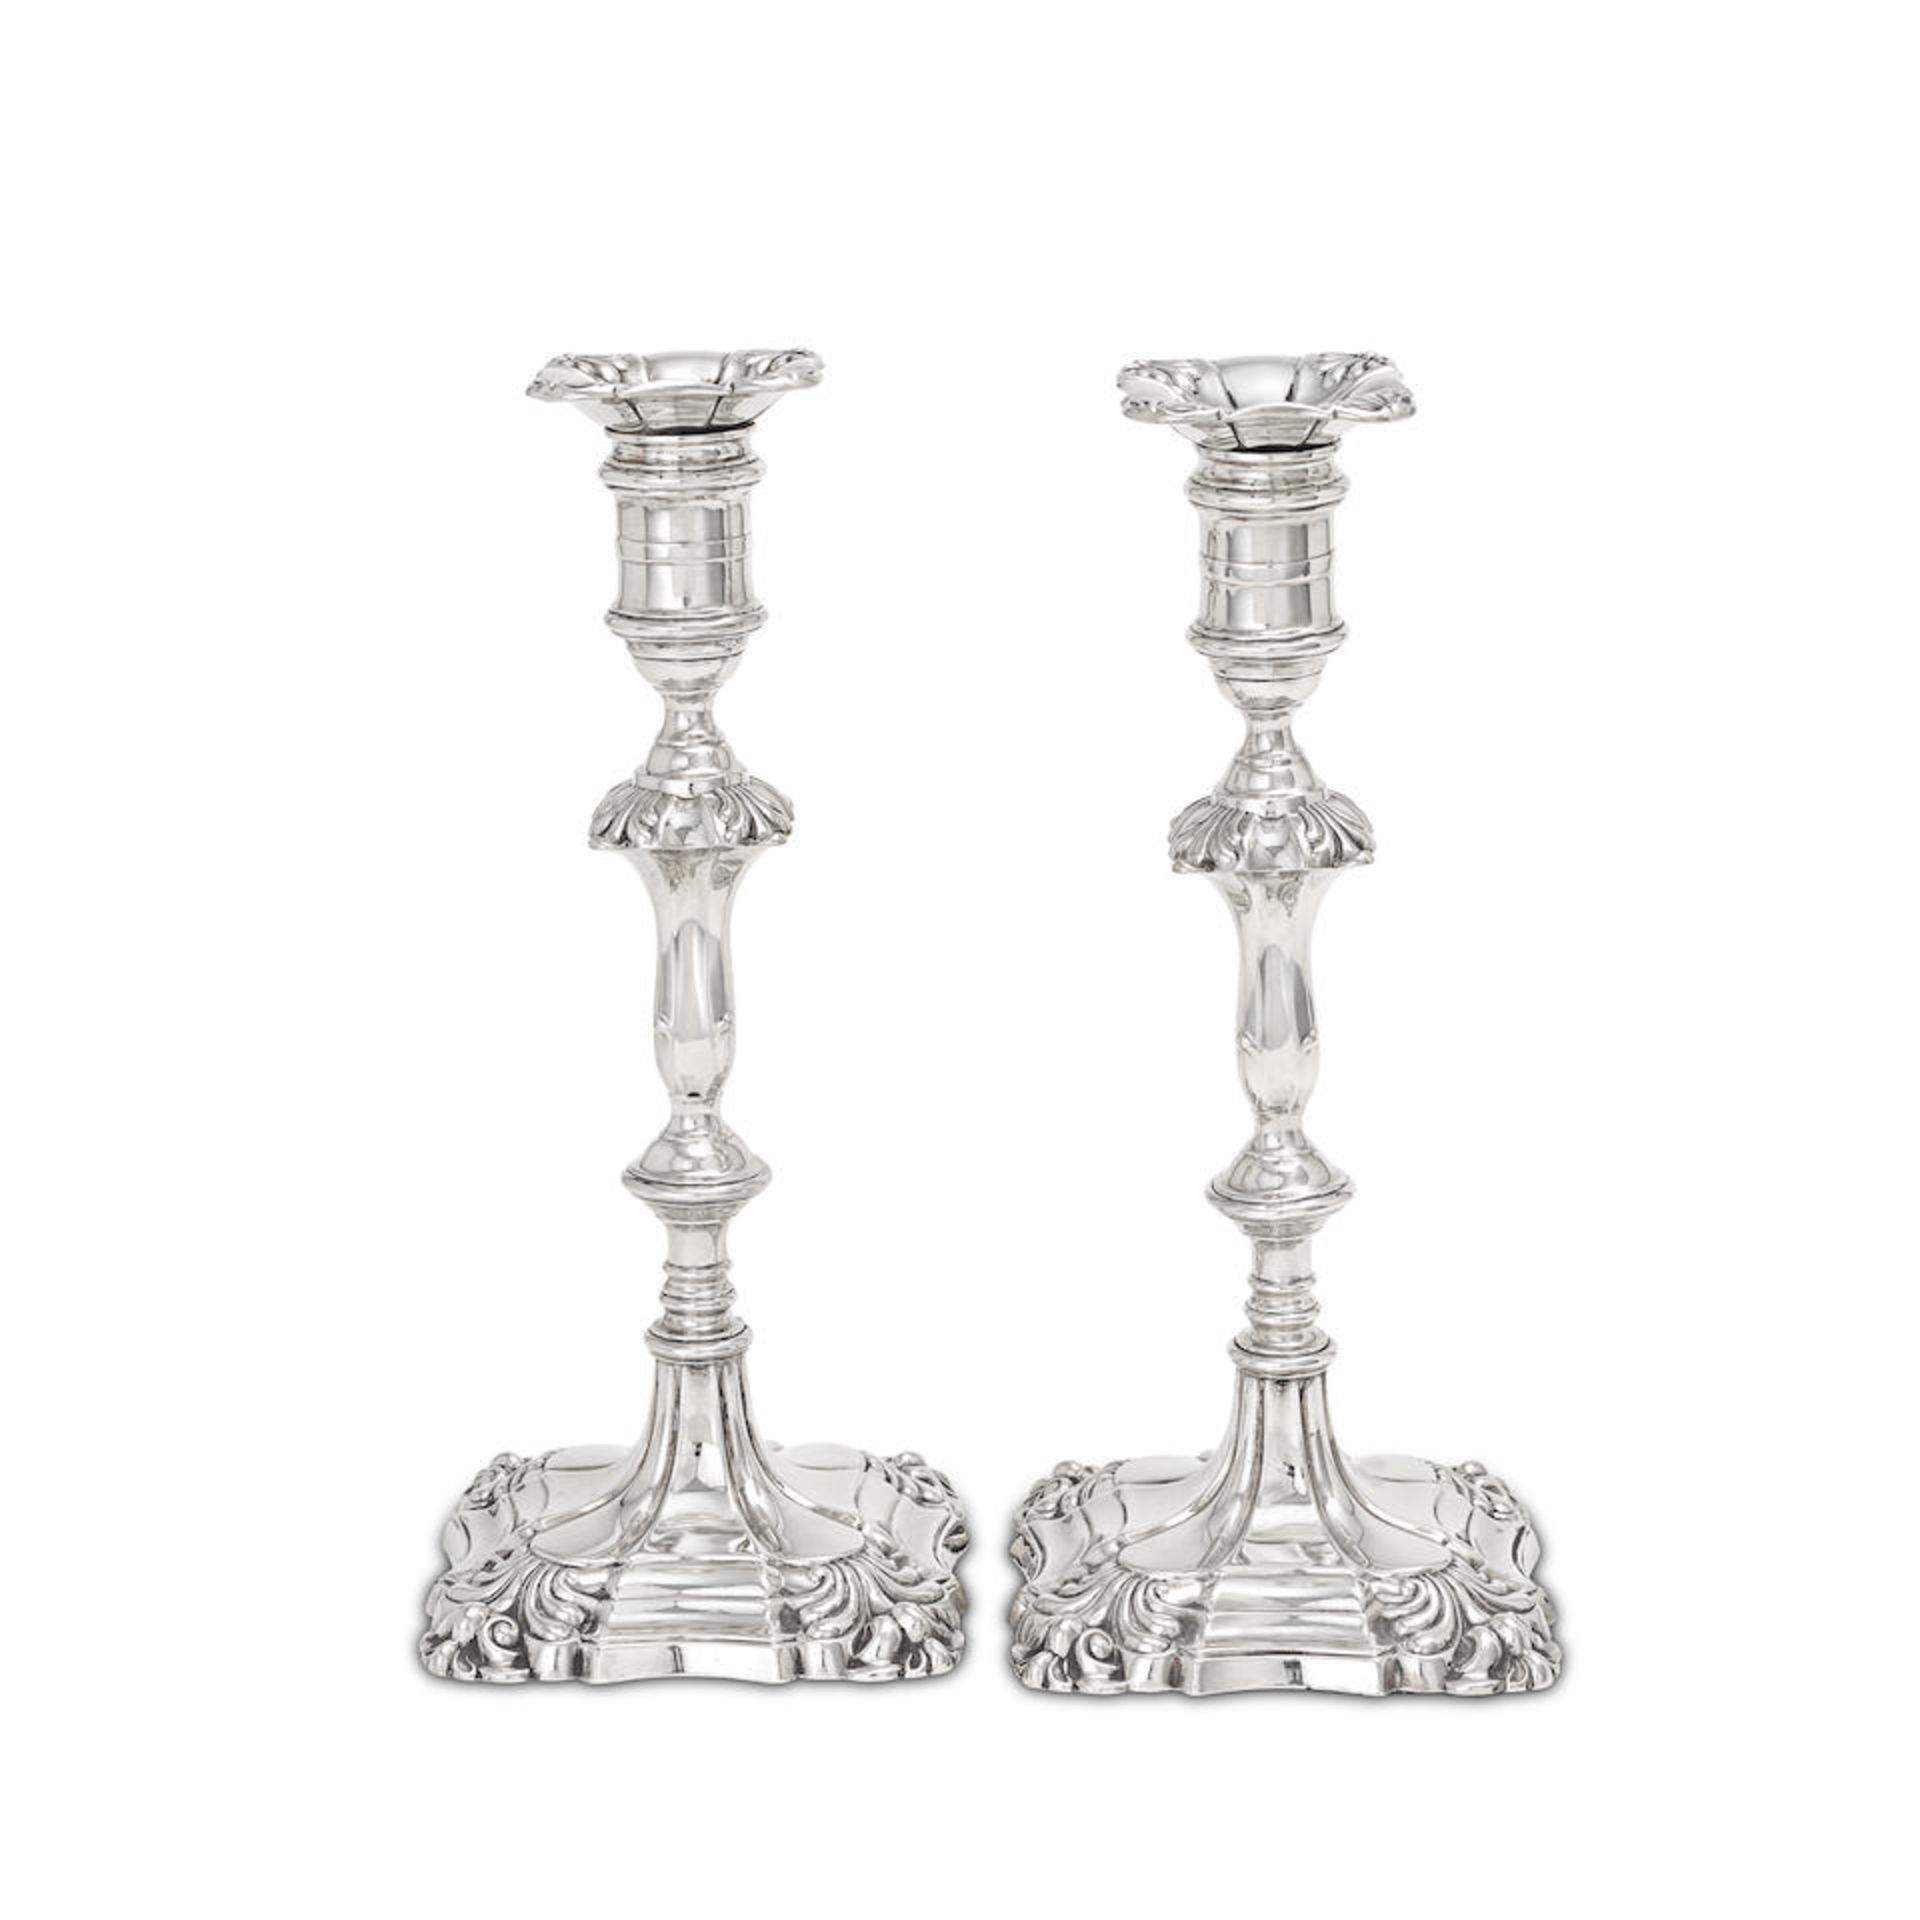 A pair of 18th century style silver candlesticks Thomas A Scott, Sheffield 1911